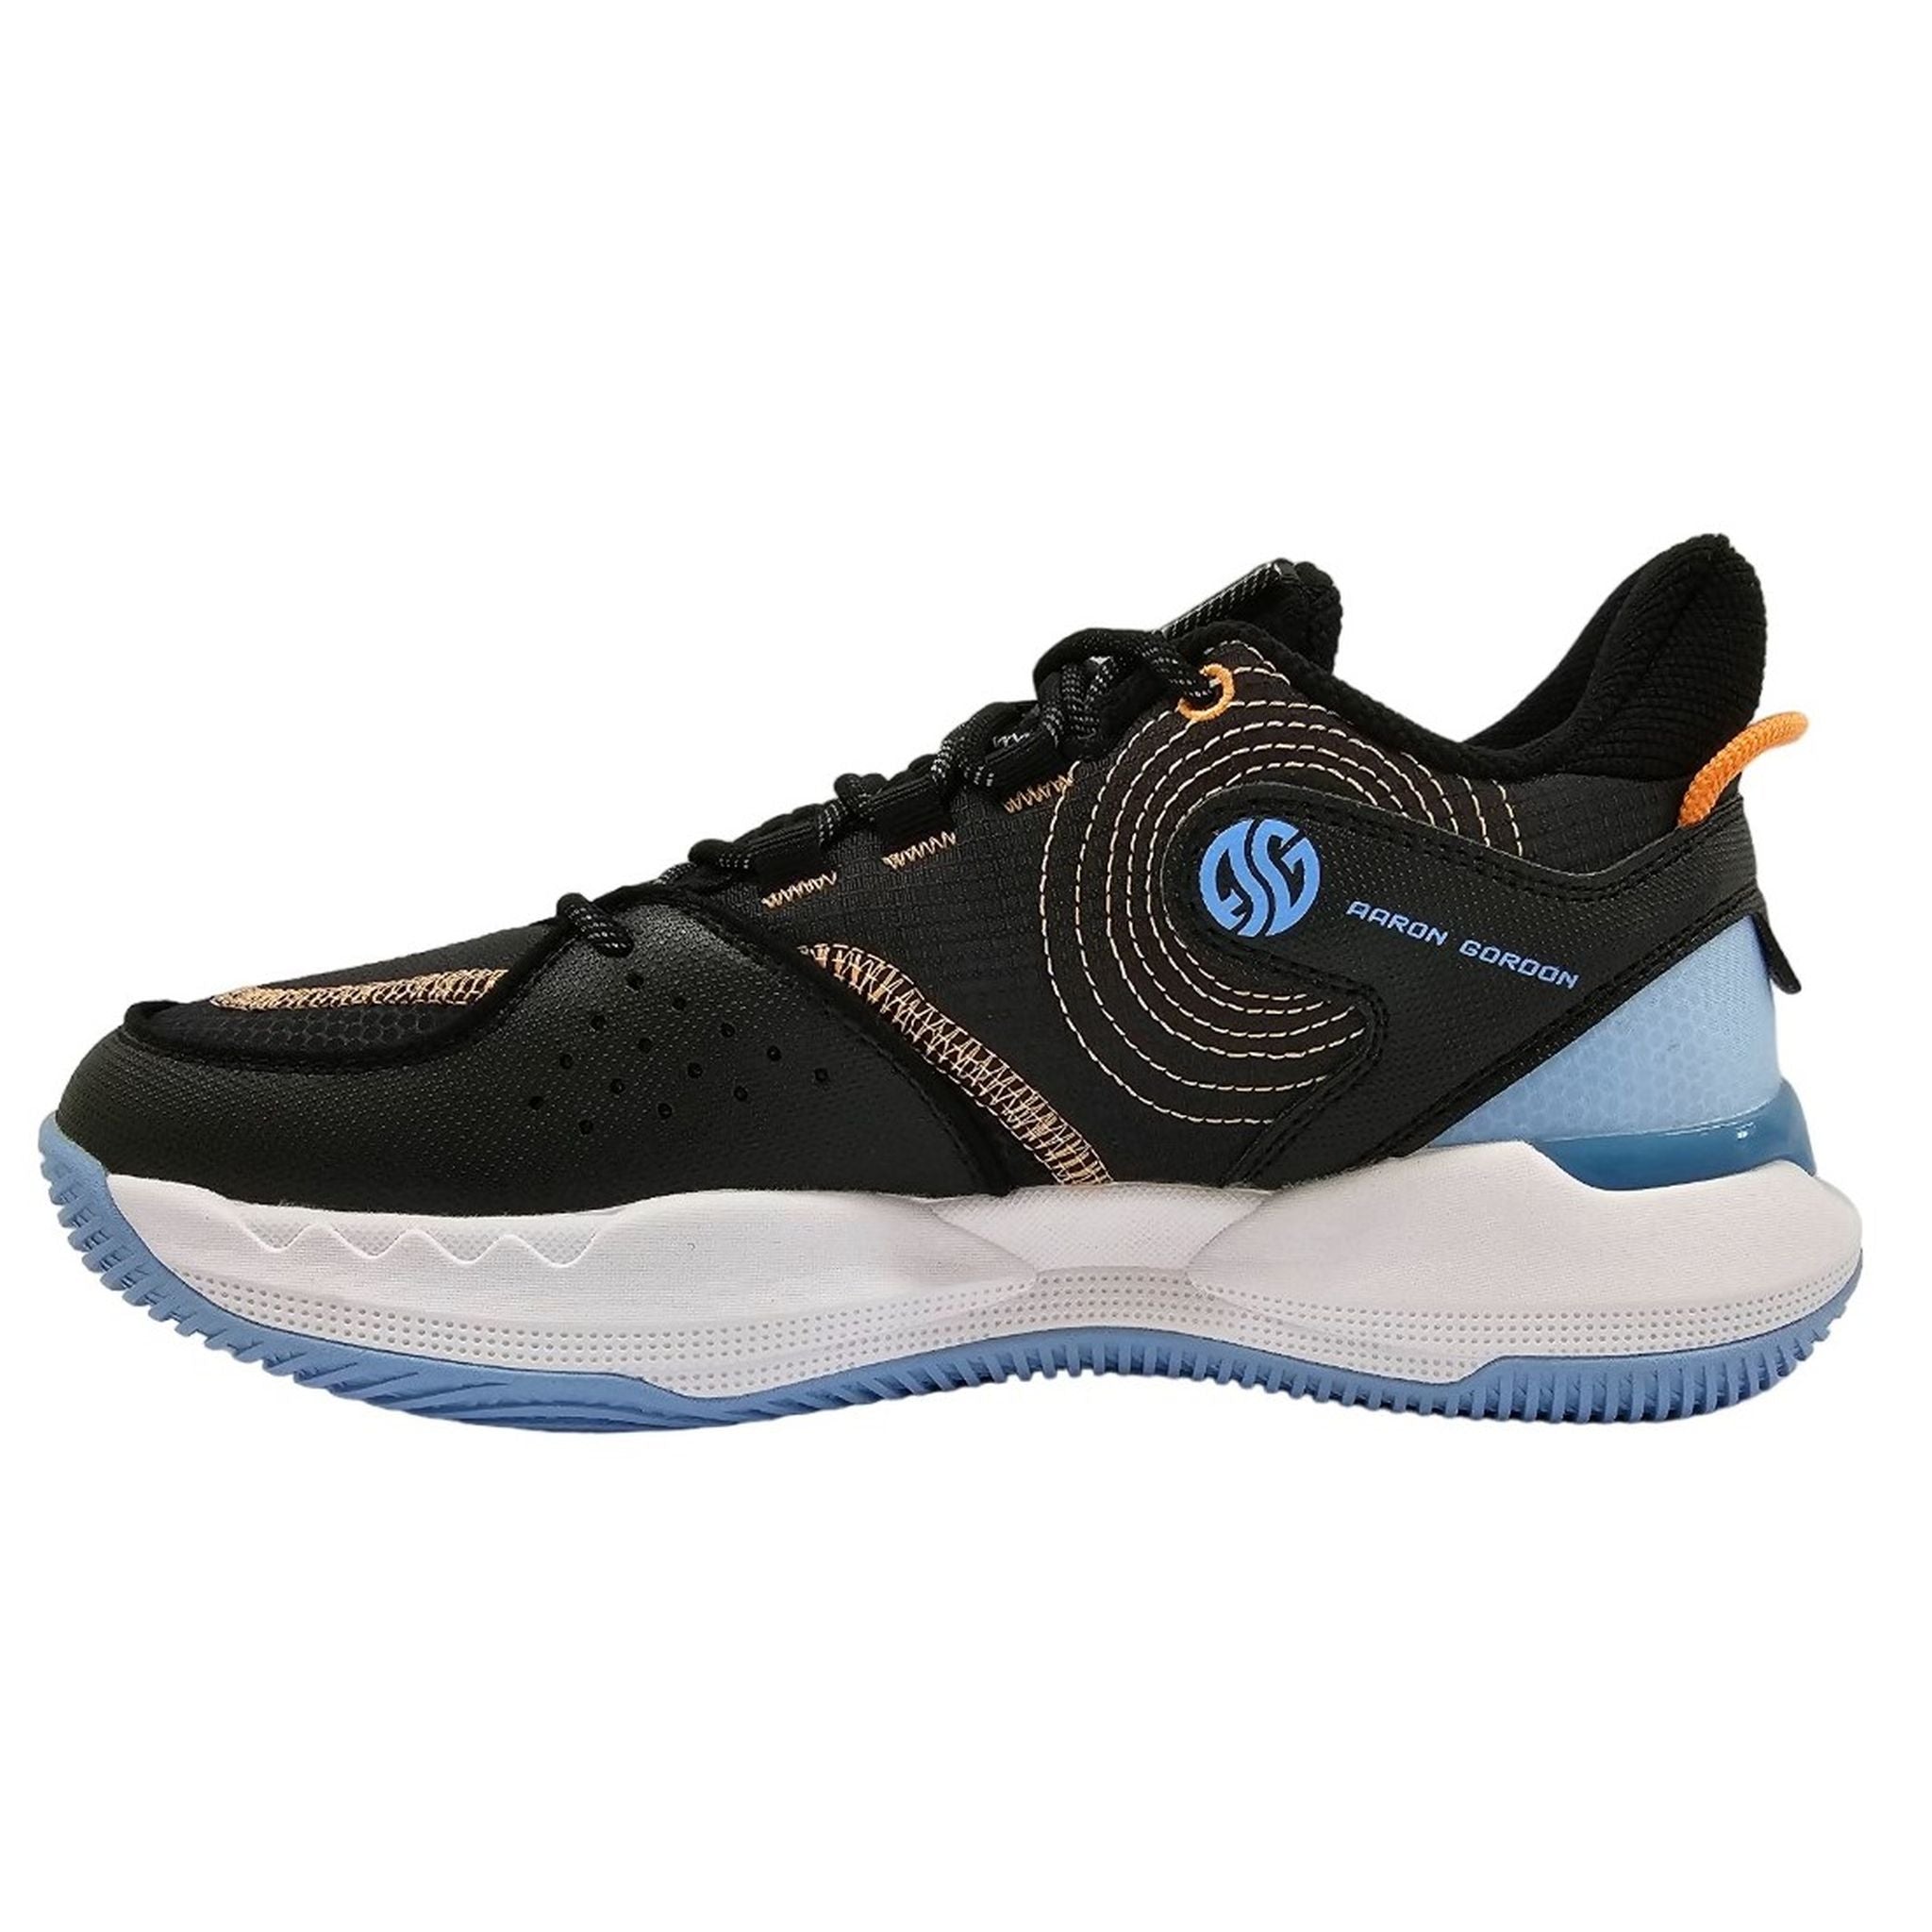 361 DEGREES Aaron Gordon Pull Up 2.0 Adults Basketball Shoe